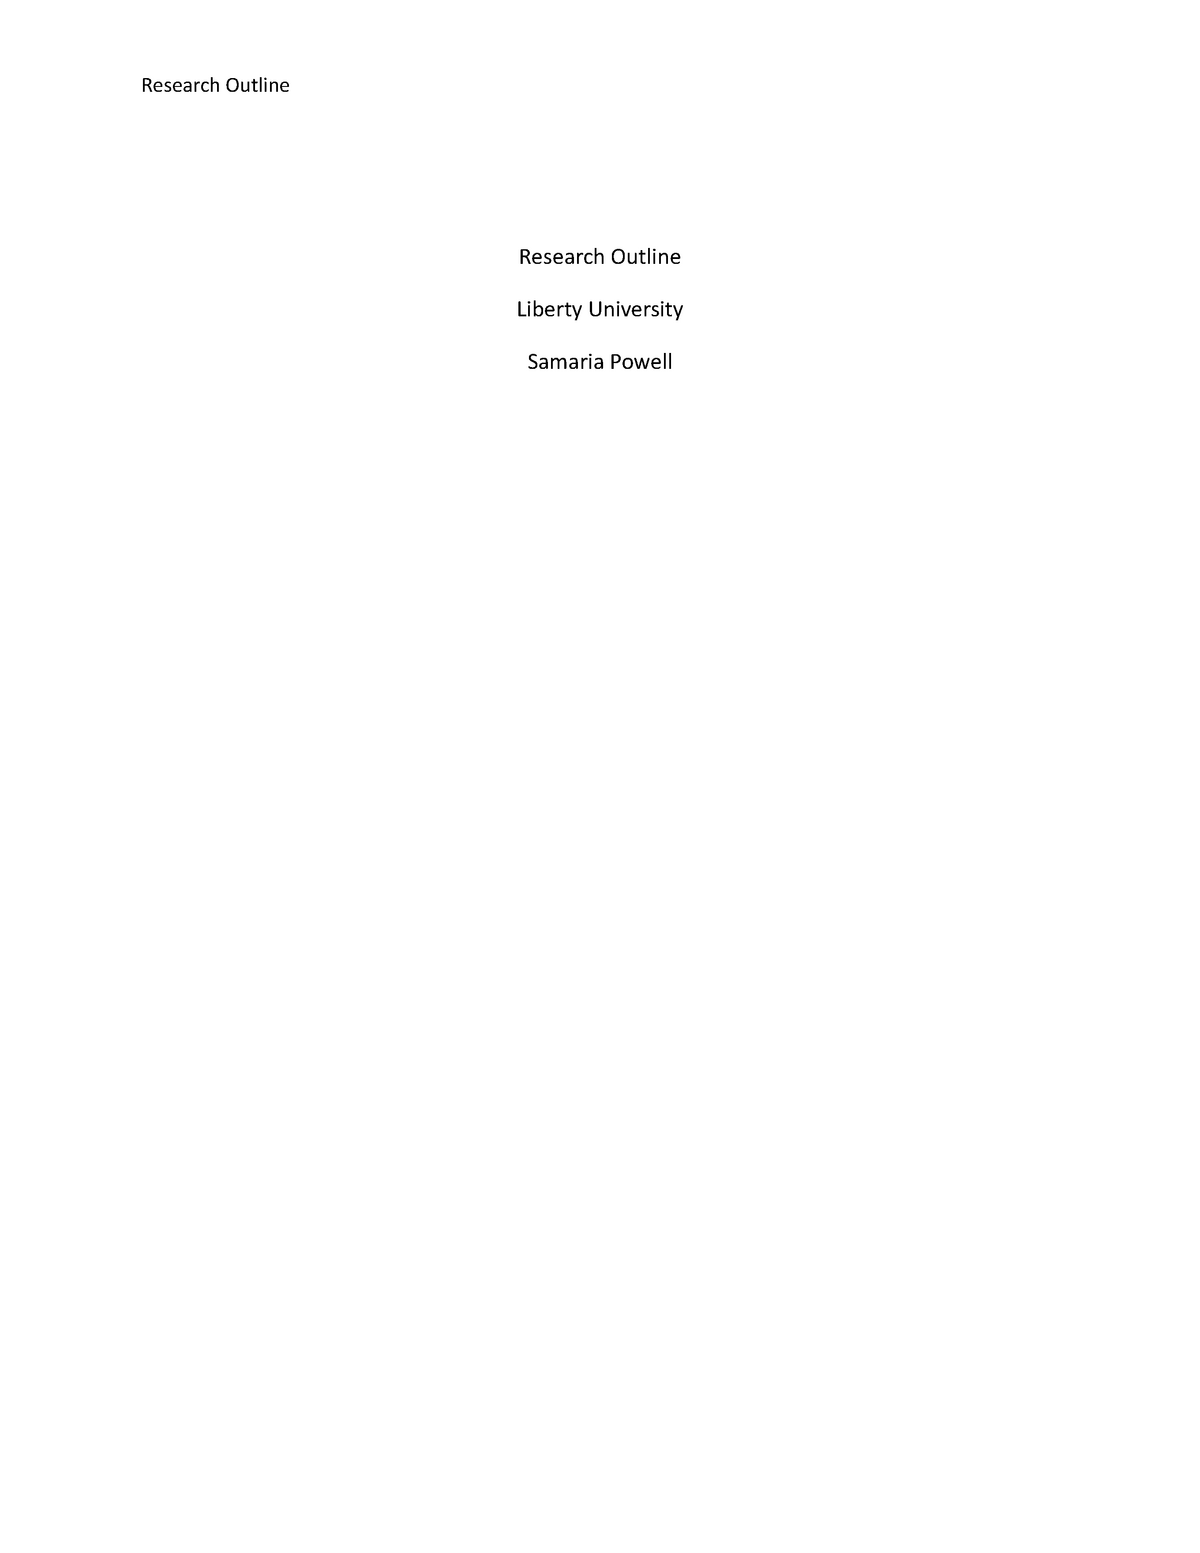 Research Outline - ASSIGNMENT - Research Outline Liberty University ...